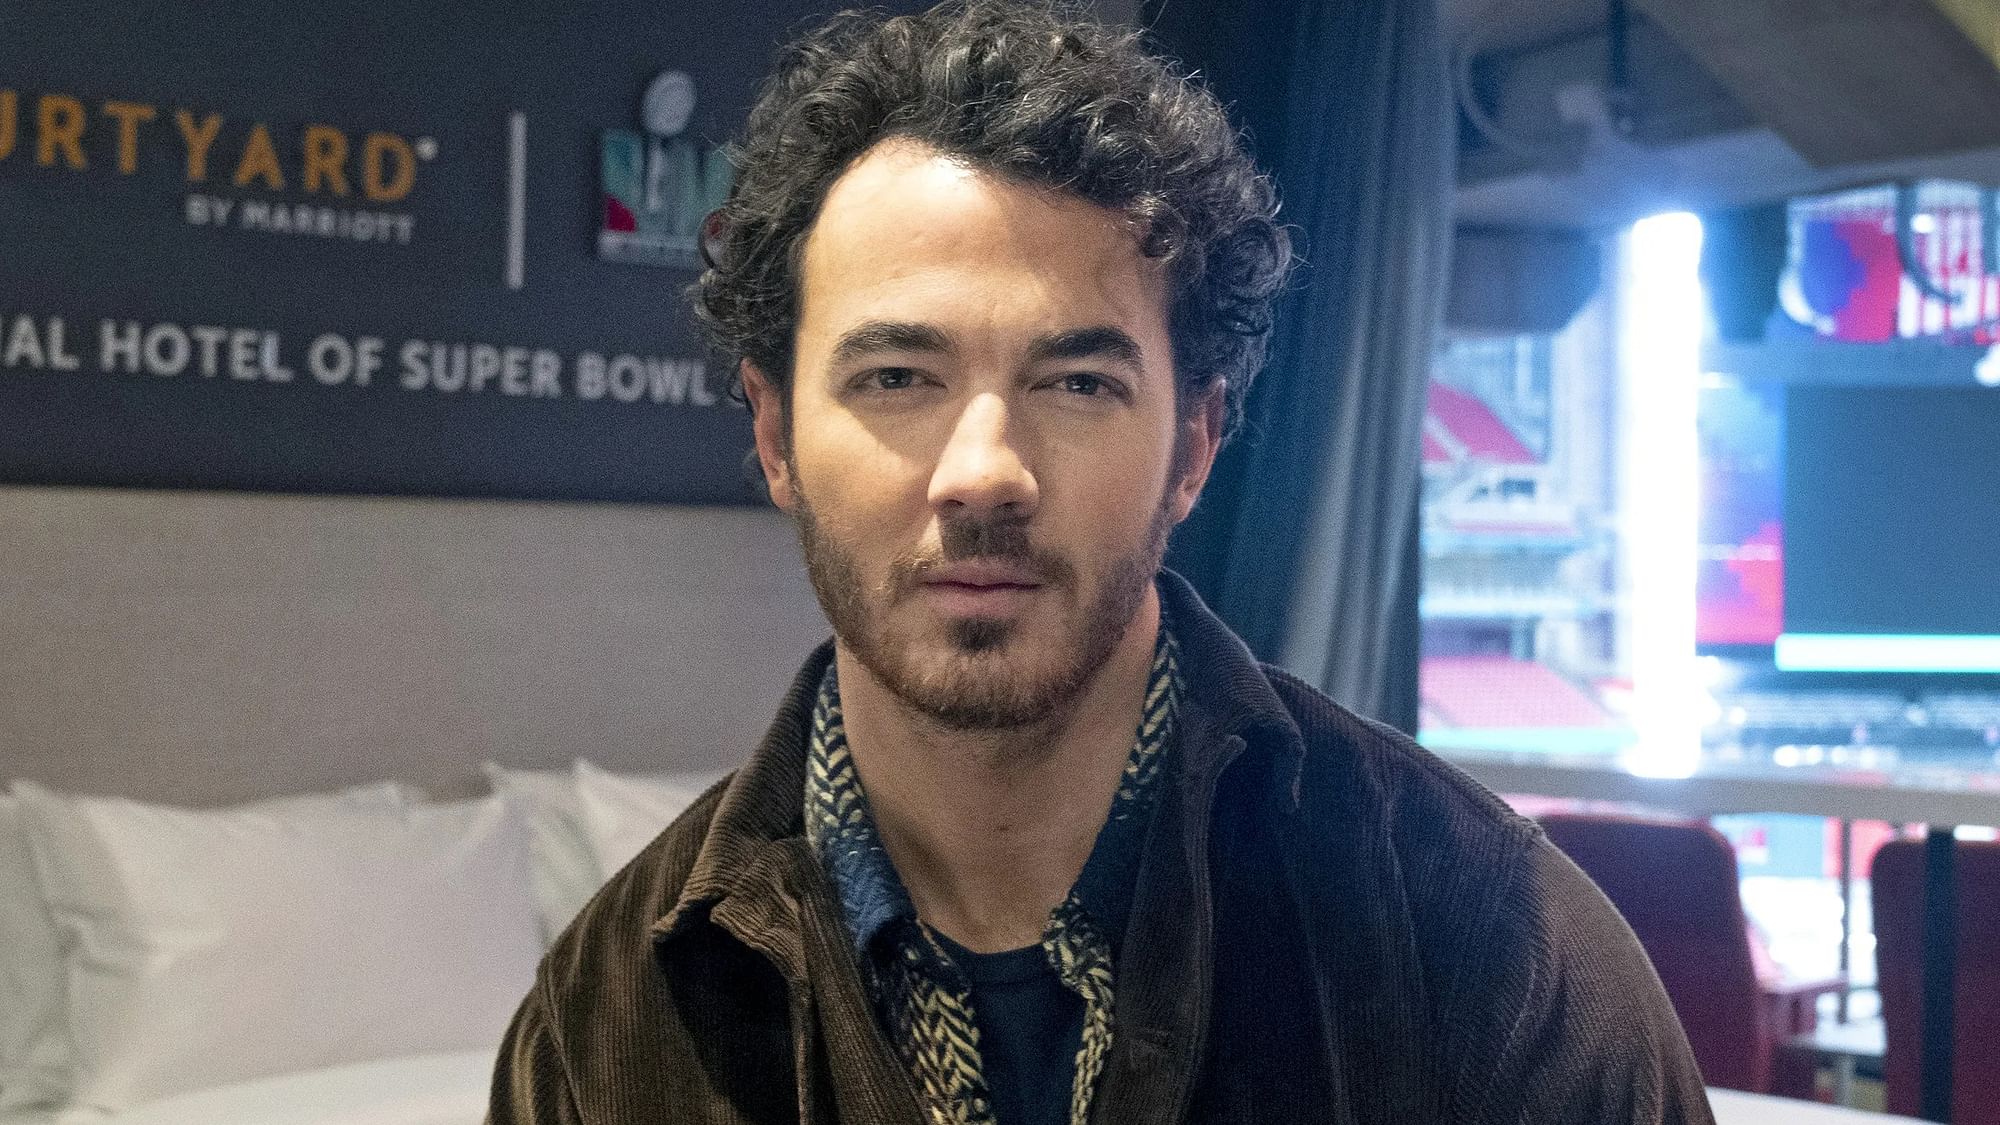 <div class="paragraphs"><p>Singer-songwriter Kevin Jonas revealed on social media on 12 June that he had surgery to remove skin cancer.</p></div>